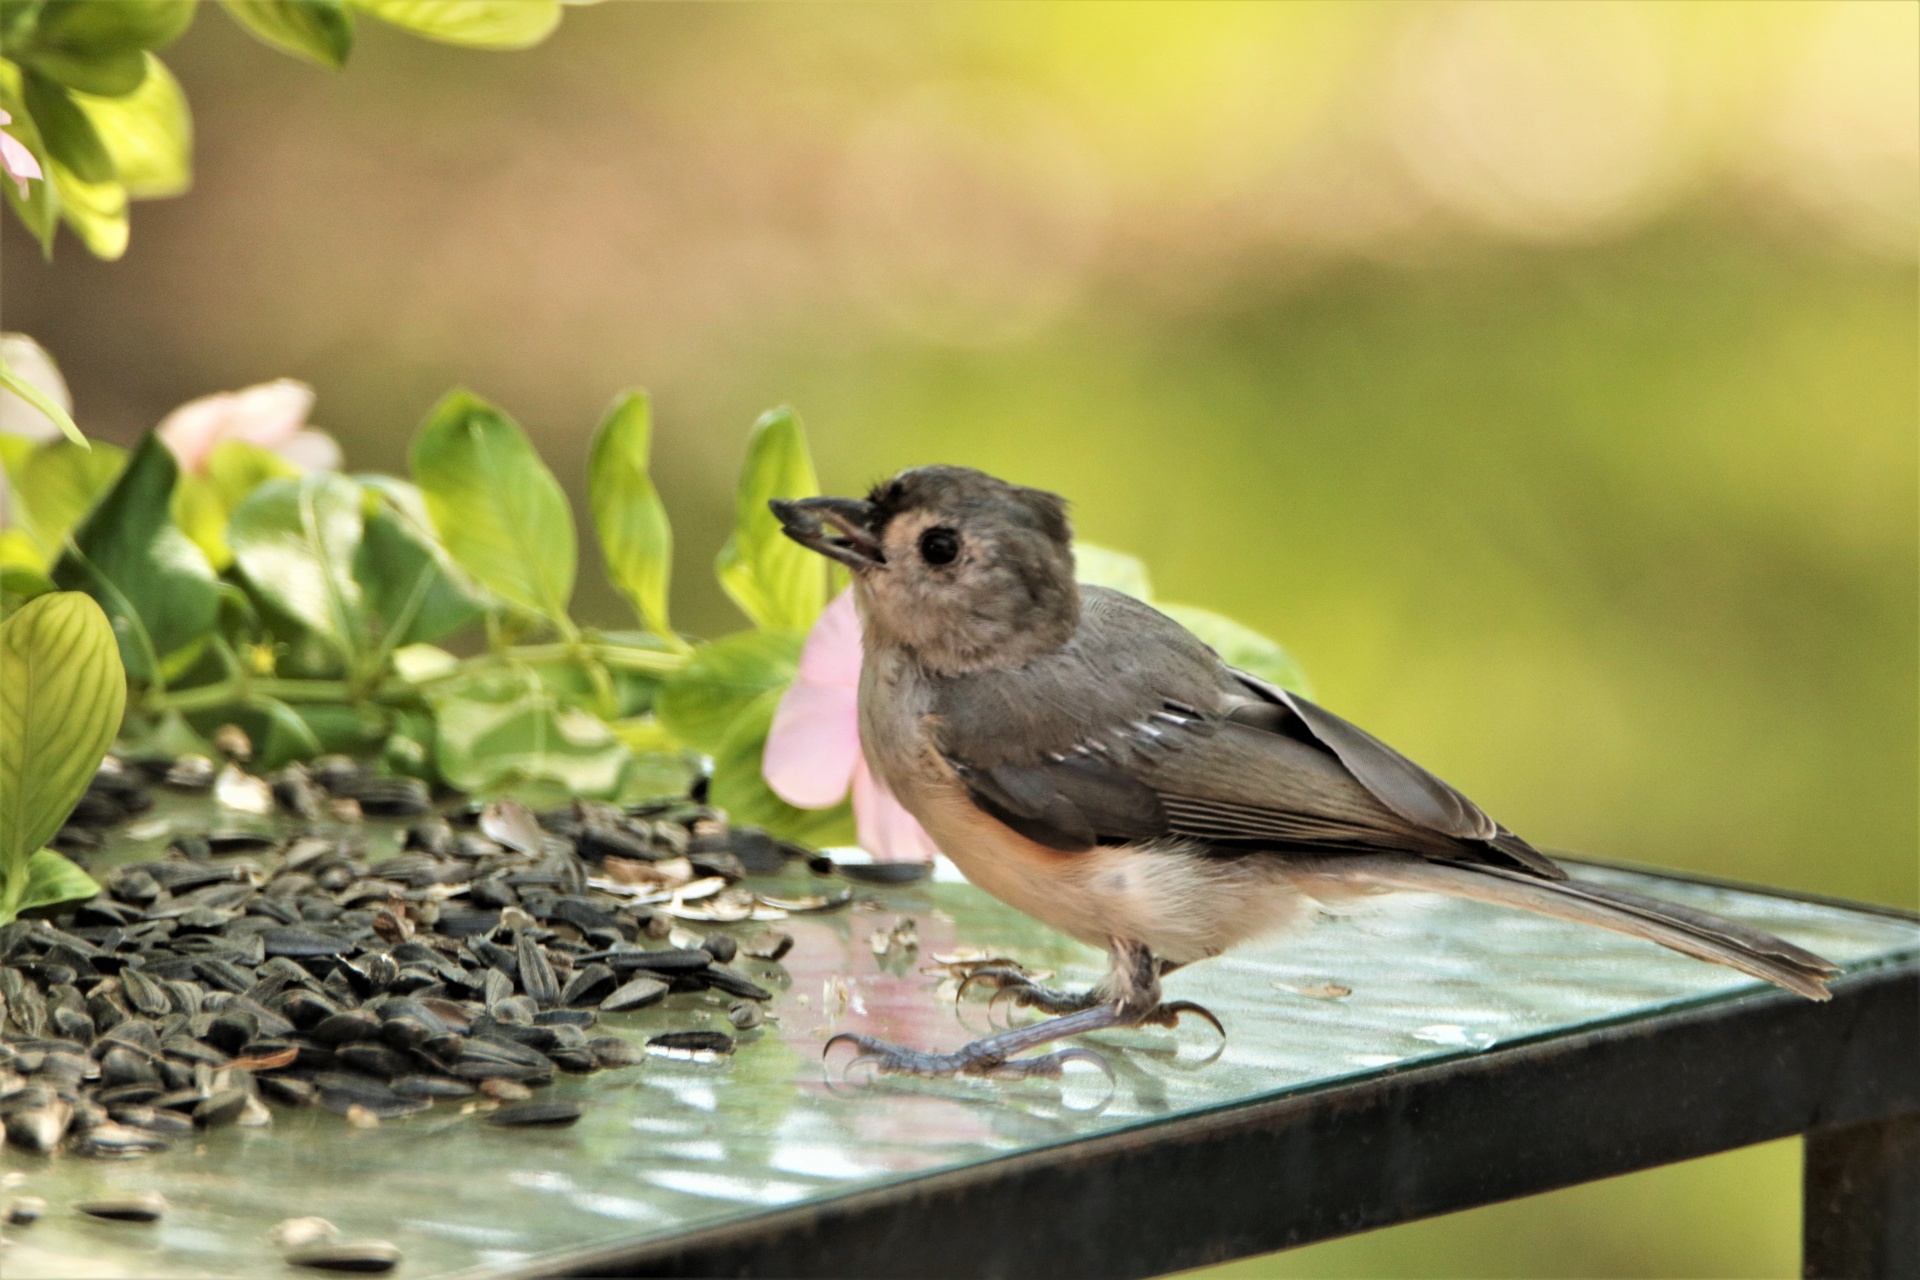 Young Tufted Titmouse On Table 3